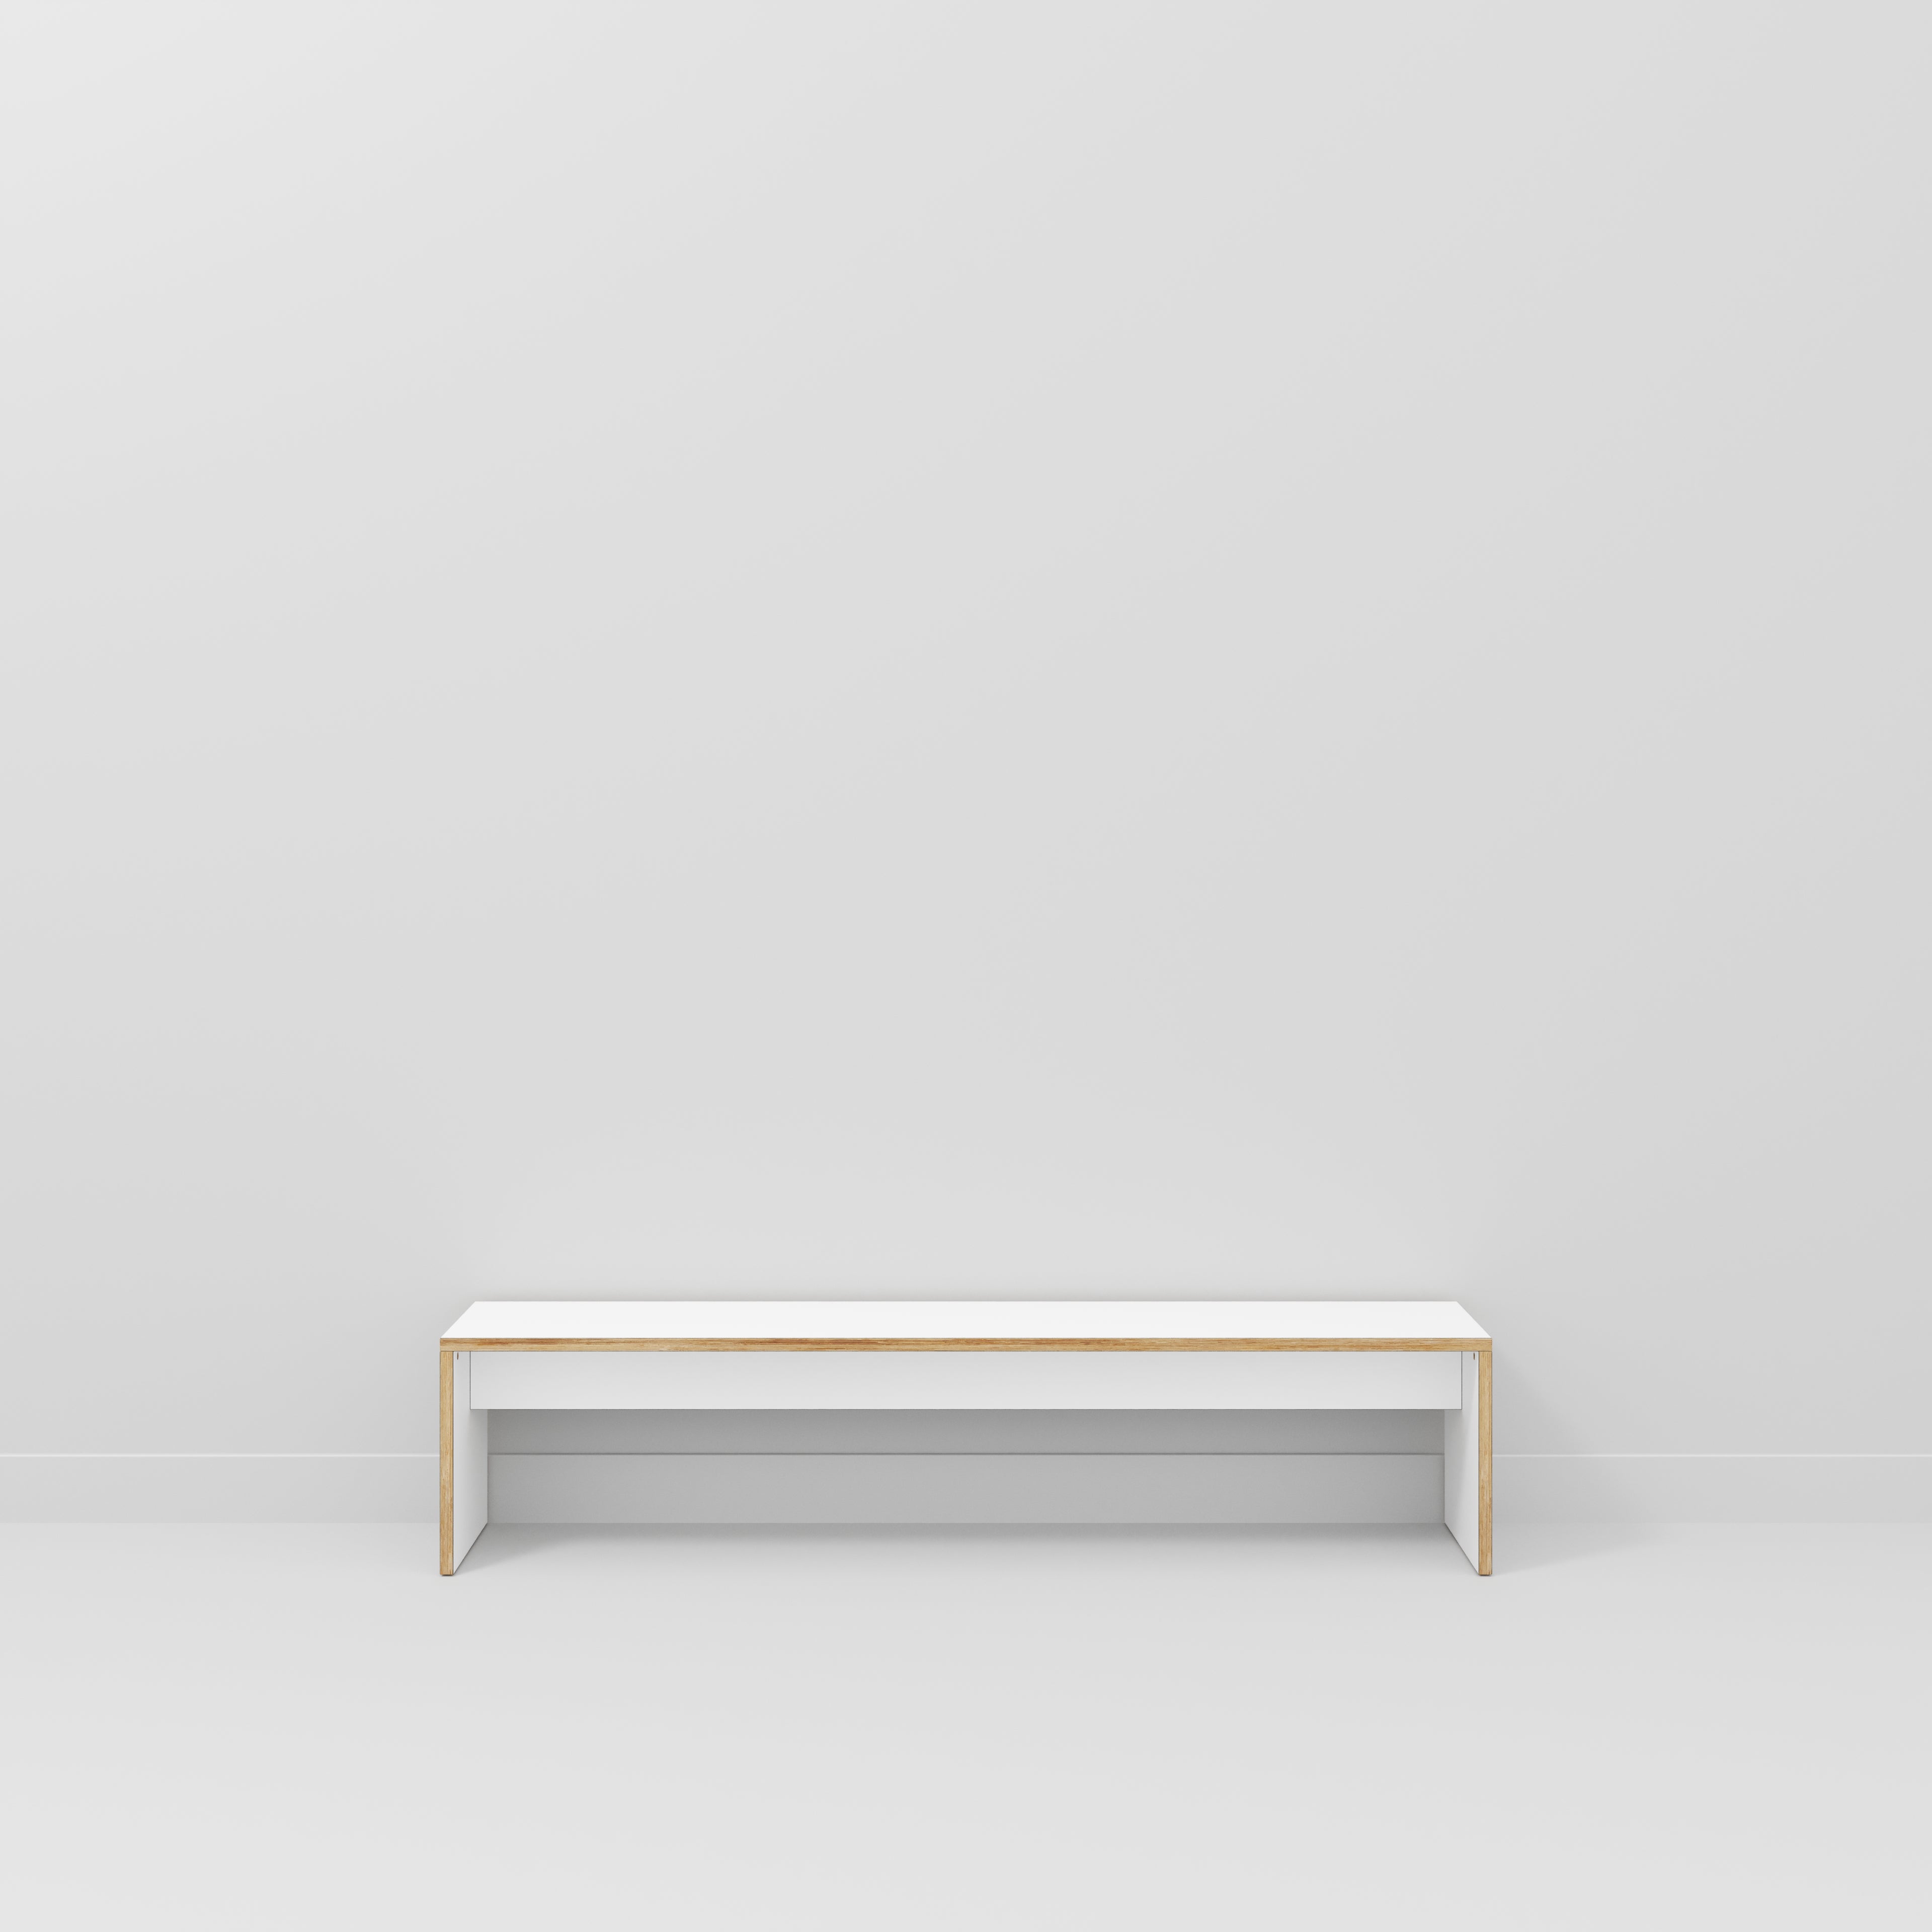 Bench Seat with Solid Sides - Formica White - 2000(w) x 400(d)